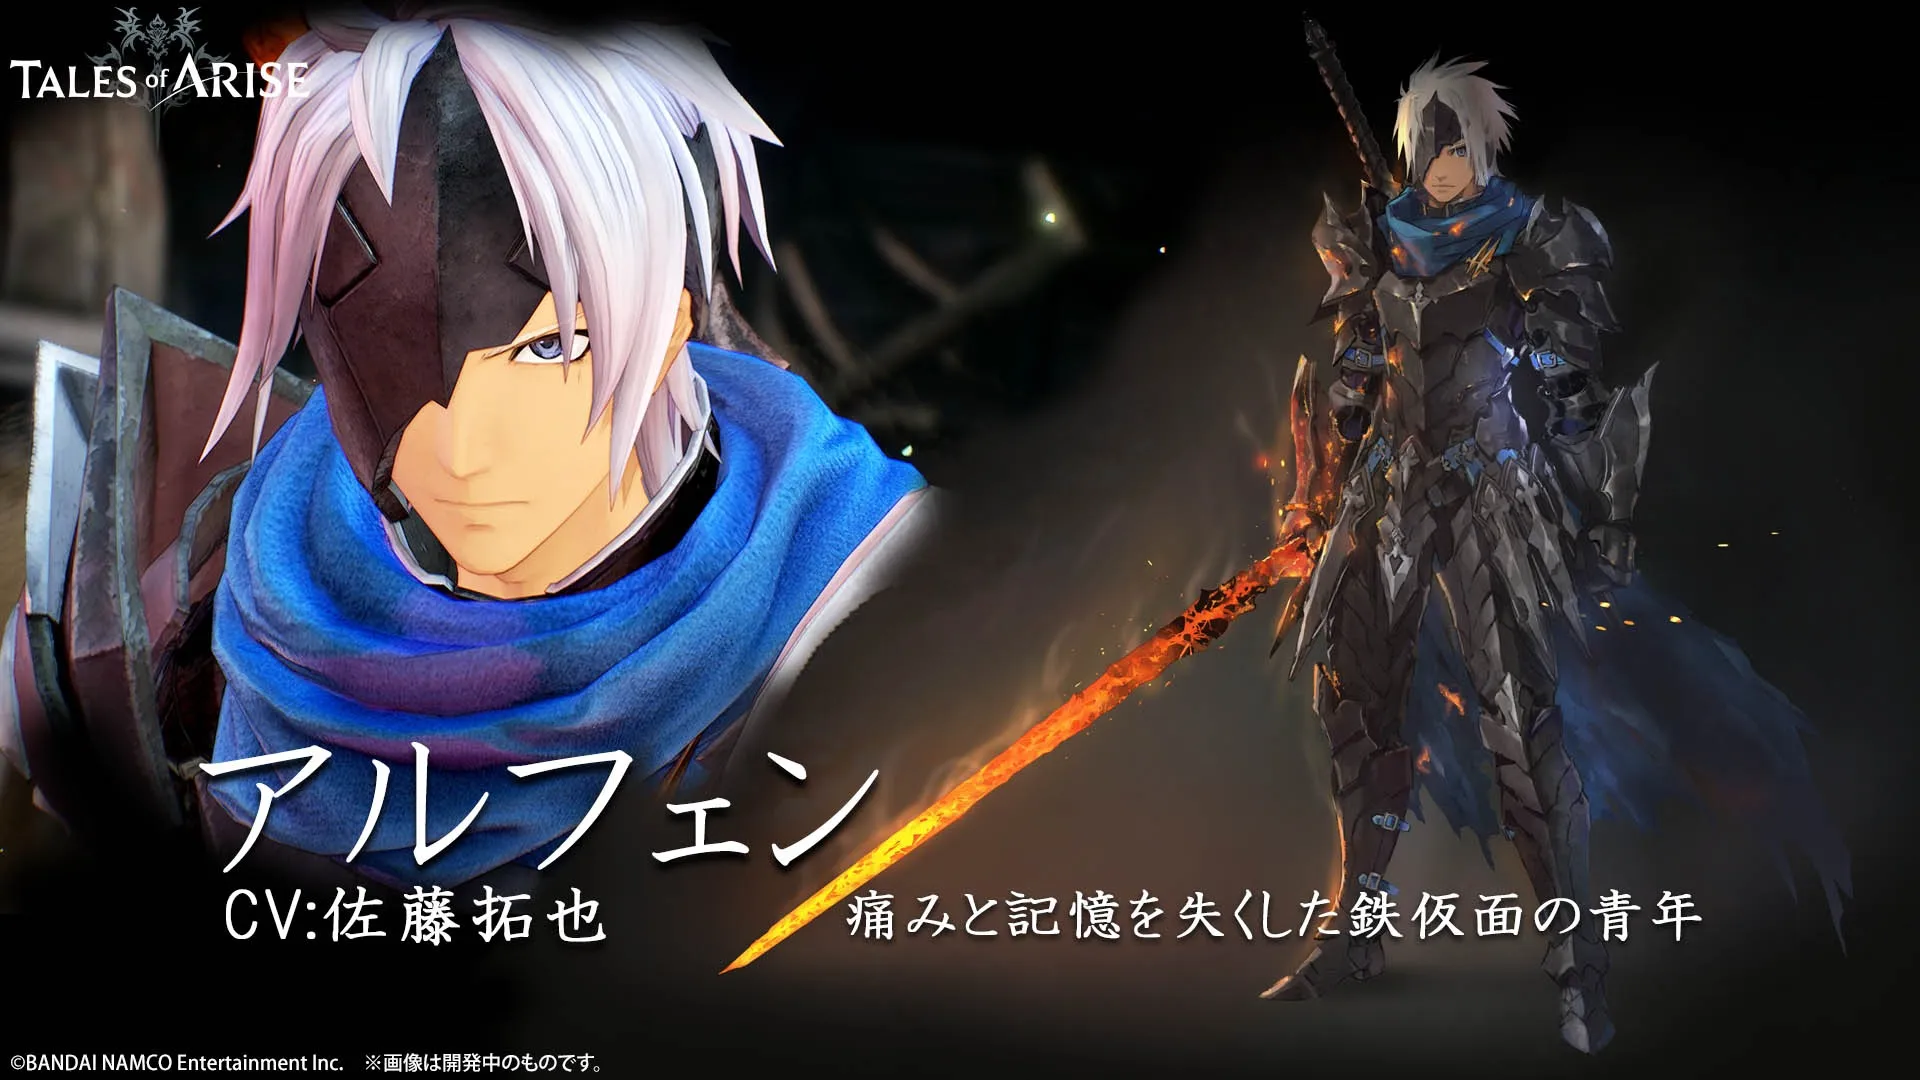 Meet Shionne and Alphen in the Latest Tales of Arise Trailer - Hey